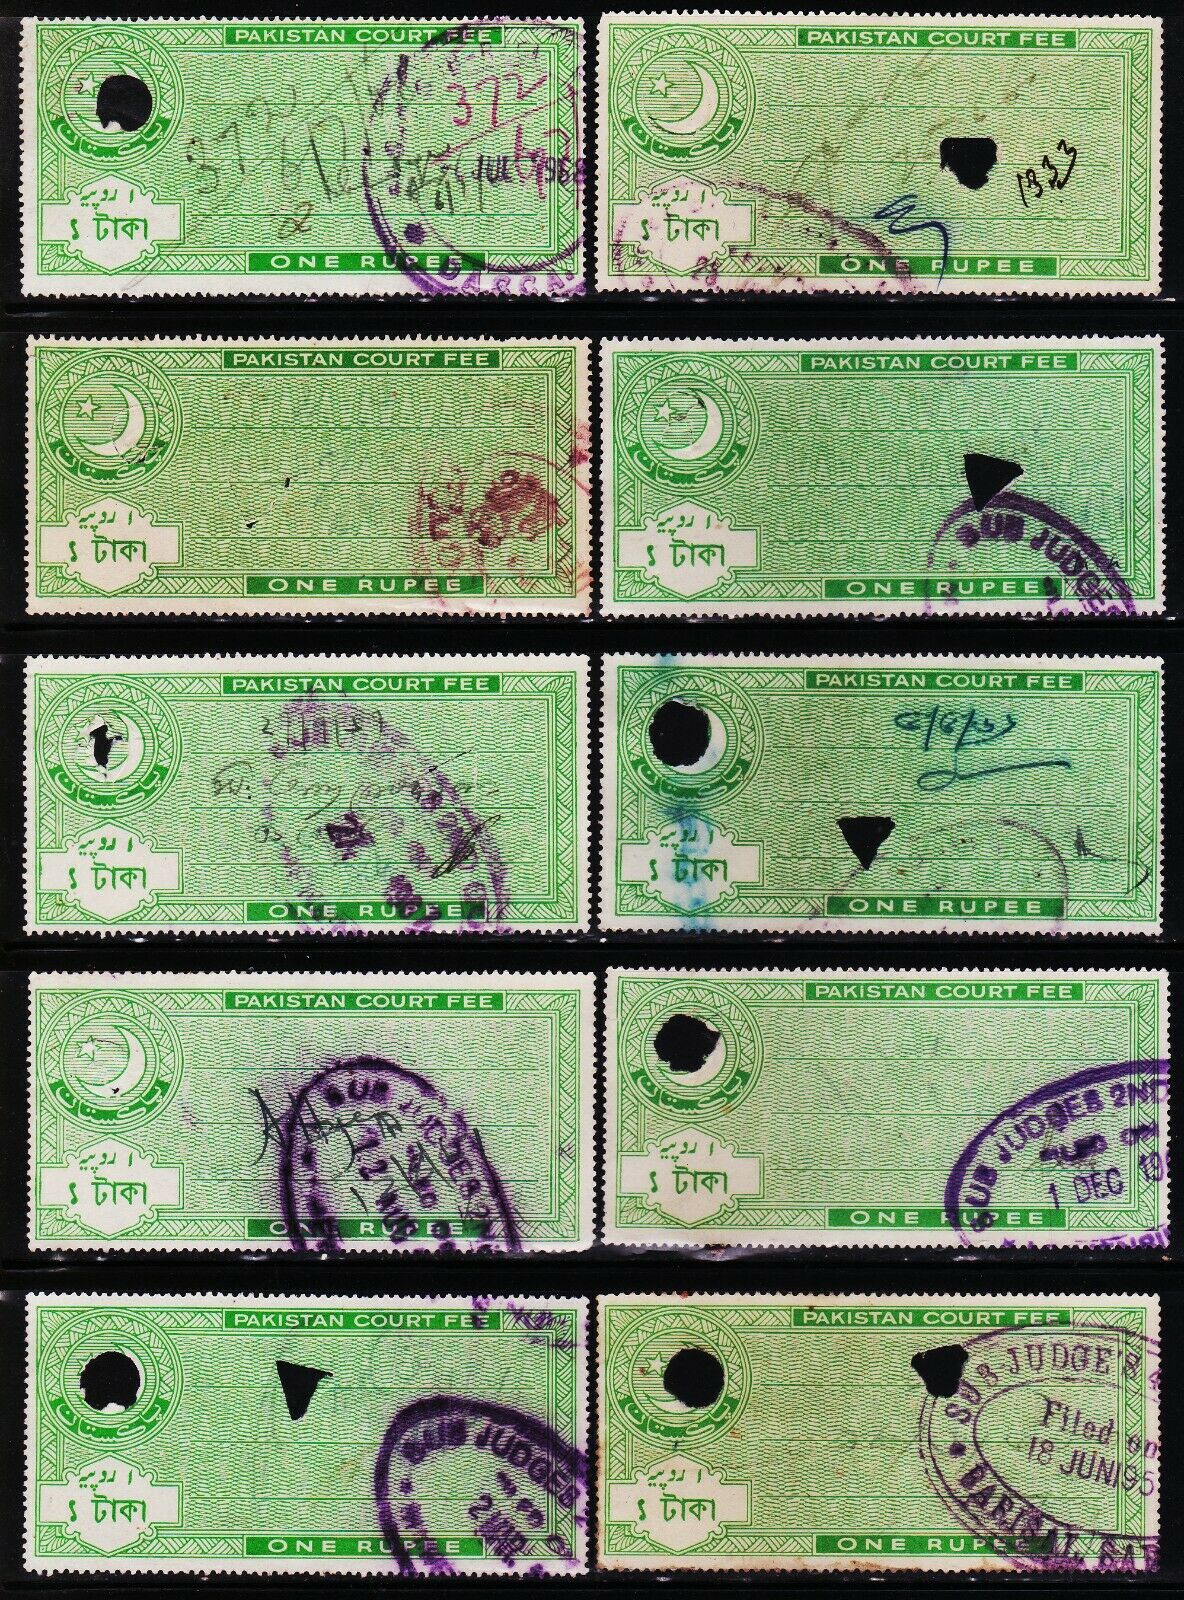 West Pakistan 1tk 10 Court Fee Revenue Fiscal Used Stamps #02